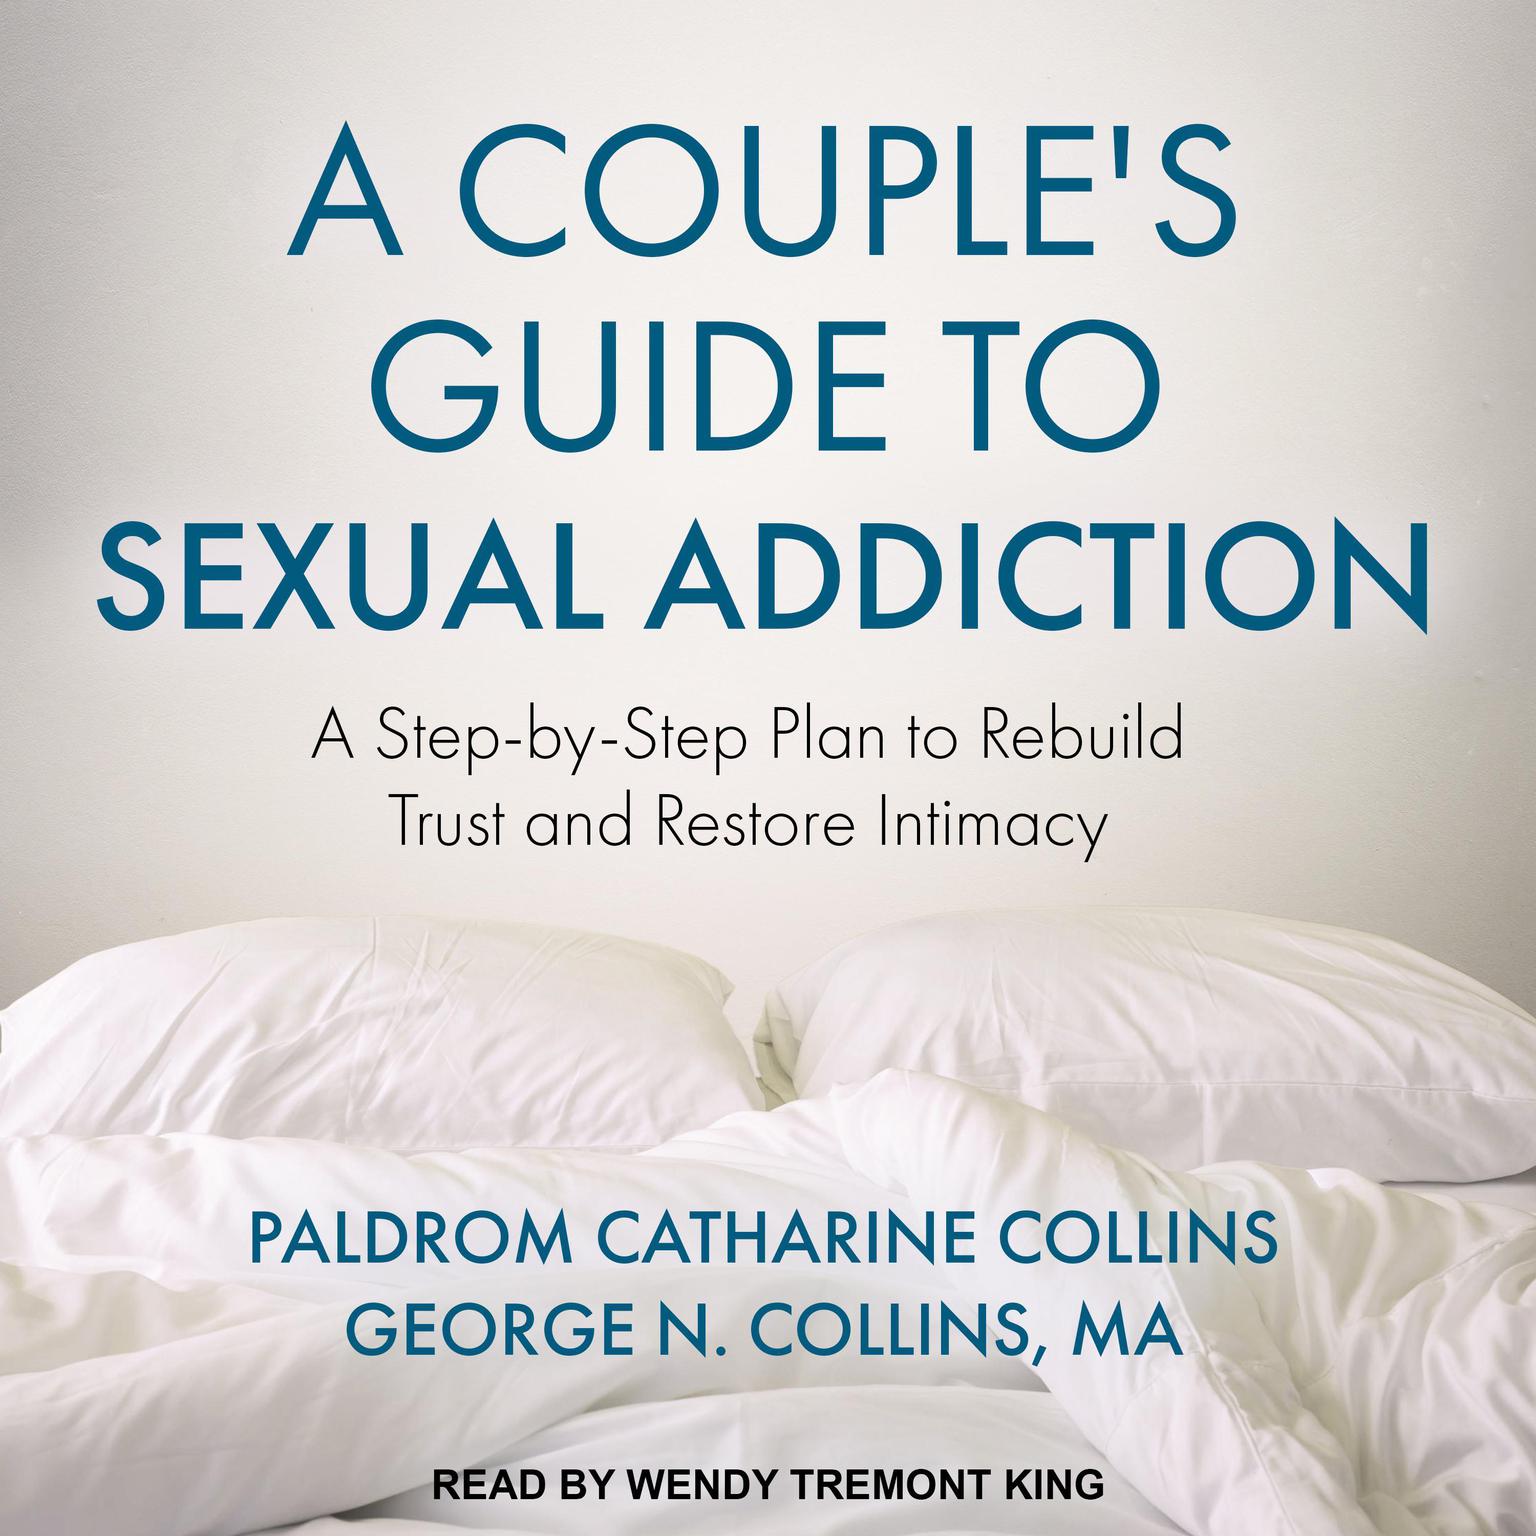 A Couples Guide to Sexual Addiction: A Step-by-Step Plan to Rebuild Trust and Restore Intimacy Audiobook, by Paldrom Catharine Collins